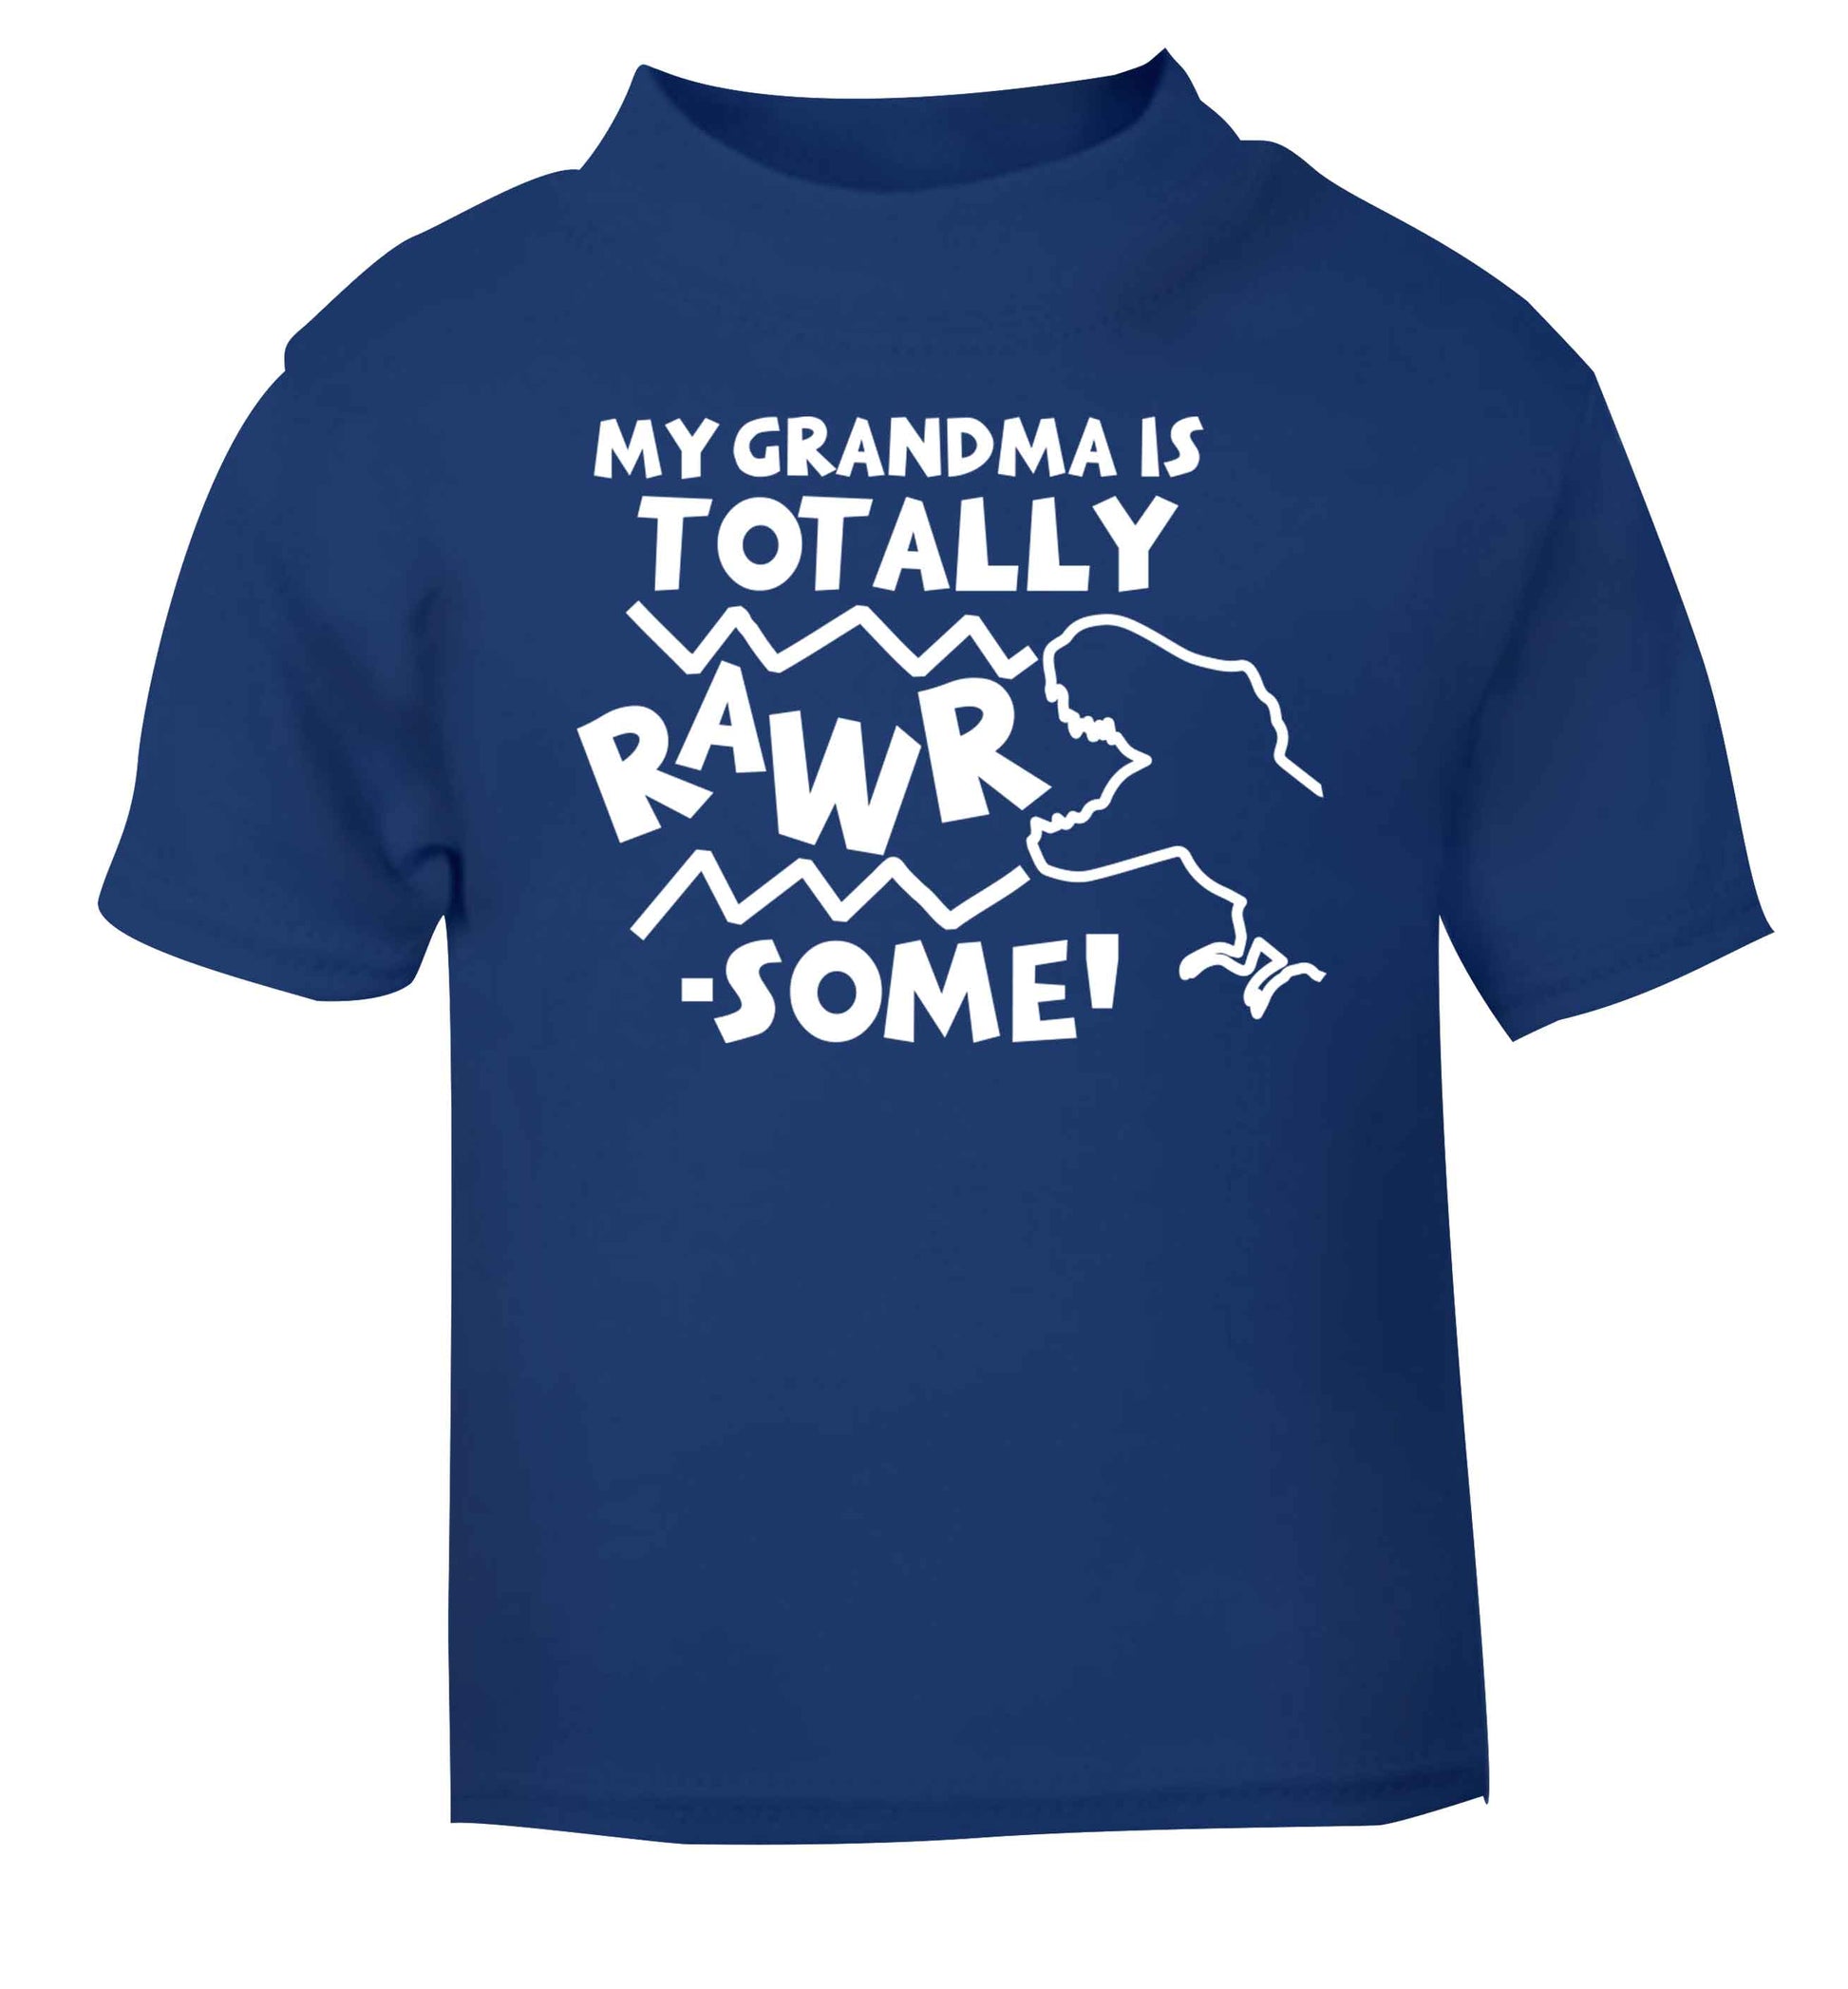 My grandma is totally rawrsome blue baby toddler Tshirt 2 Years